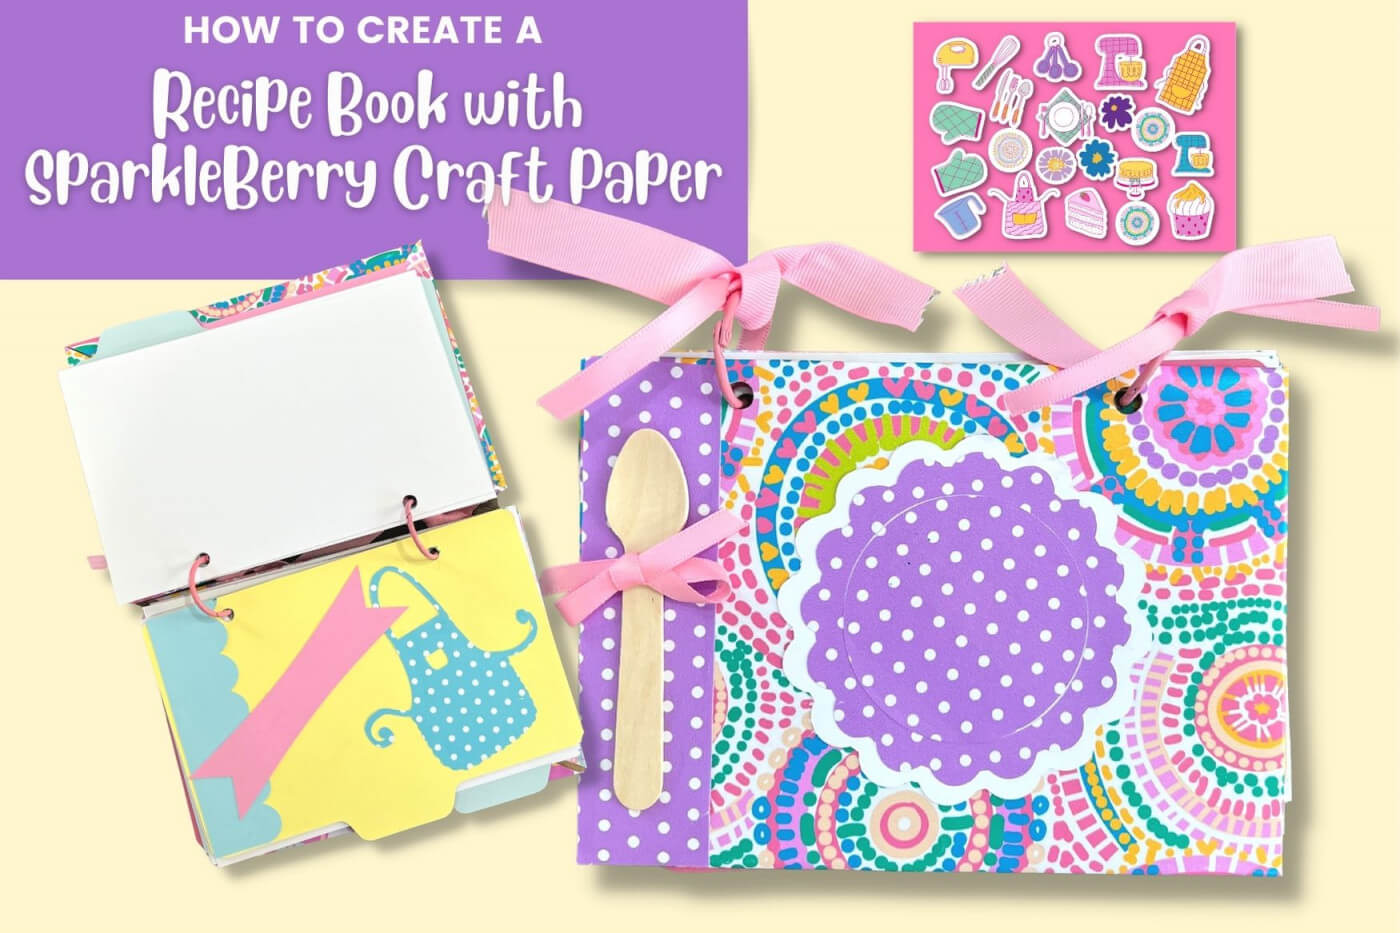 How to create a Recipe Book with SparkleBerry Craft Paper